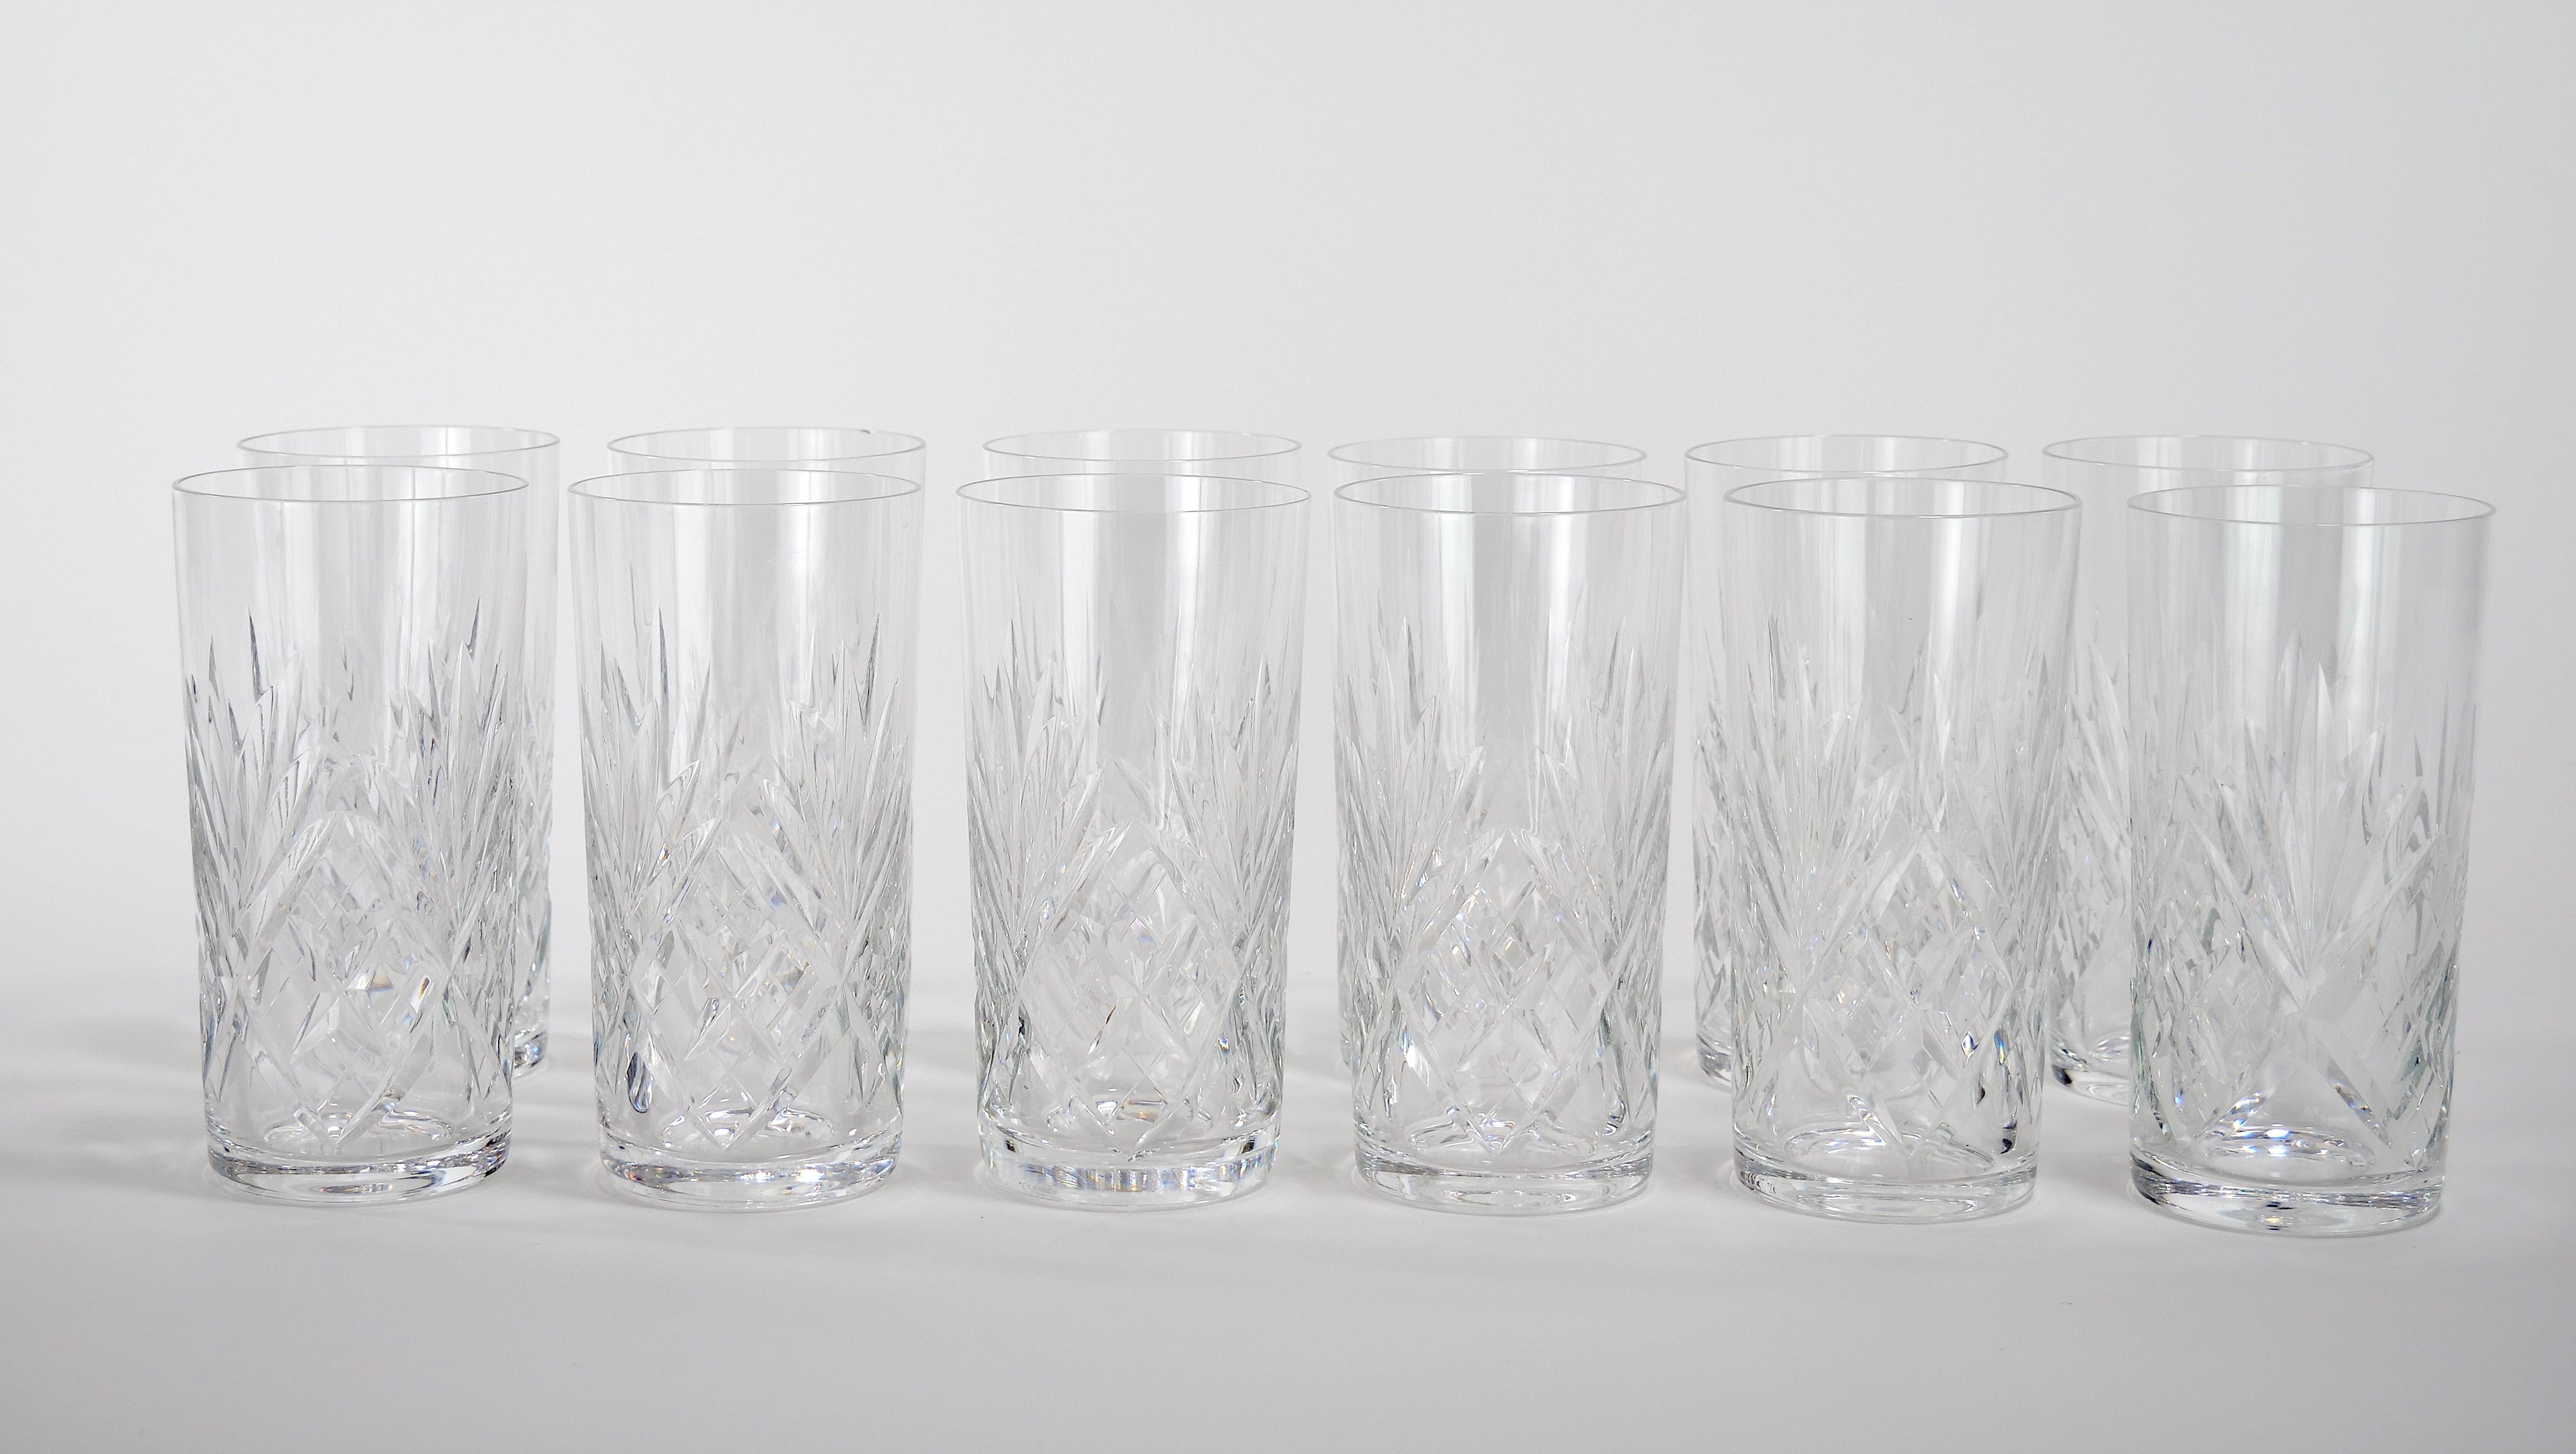 Richly hand cut and mouth blown barware and tableware glassware service for 12 people. Each glass features a deep cuts that allow the light to retract and shine to a brilliant finish from any angle. Mouth blown and hand cut by France's oldest